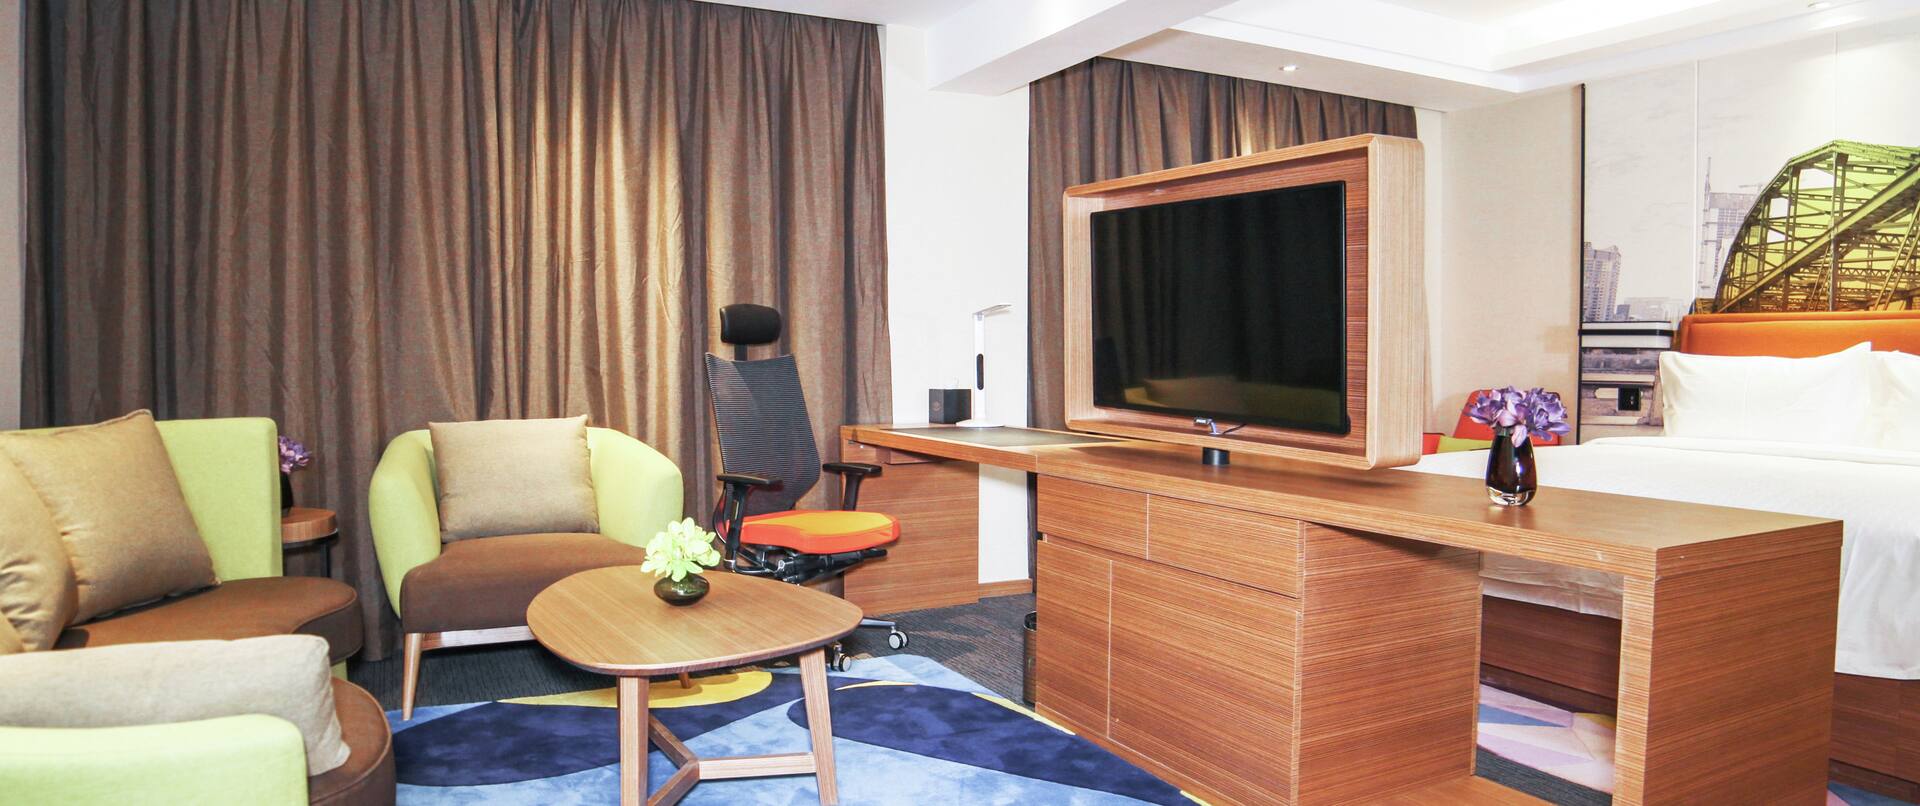 King Bed, Lounge Seating, Work Desk, and Flat Screen TV in Business Suite